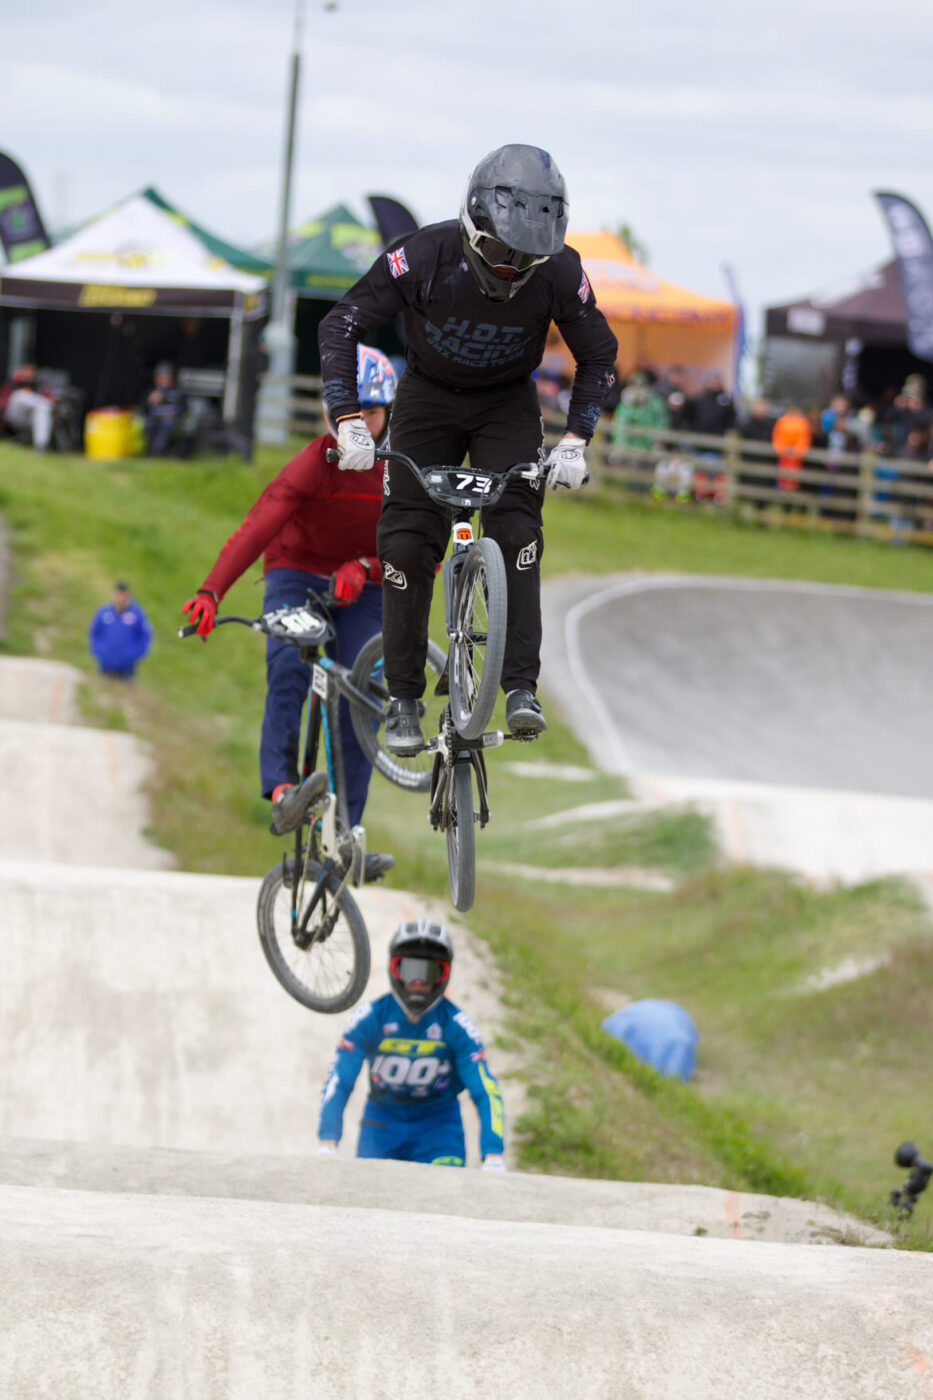 Year 12 student, Miller, is seen performing a stunt on his BMX bicycle on a race track during the National BMX Championships.